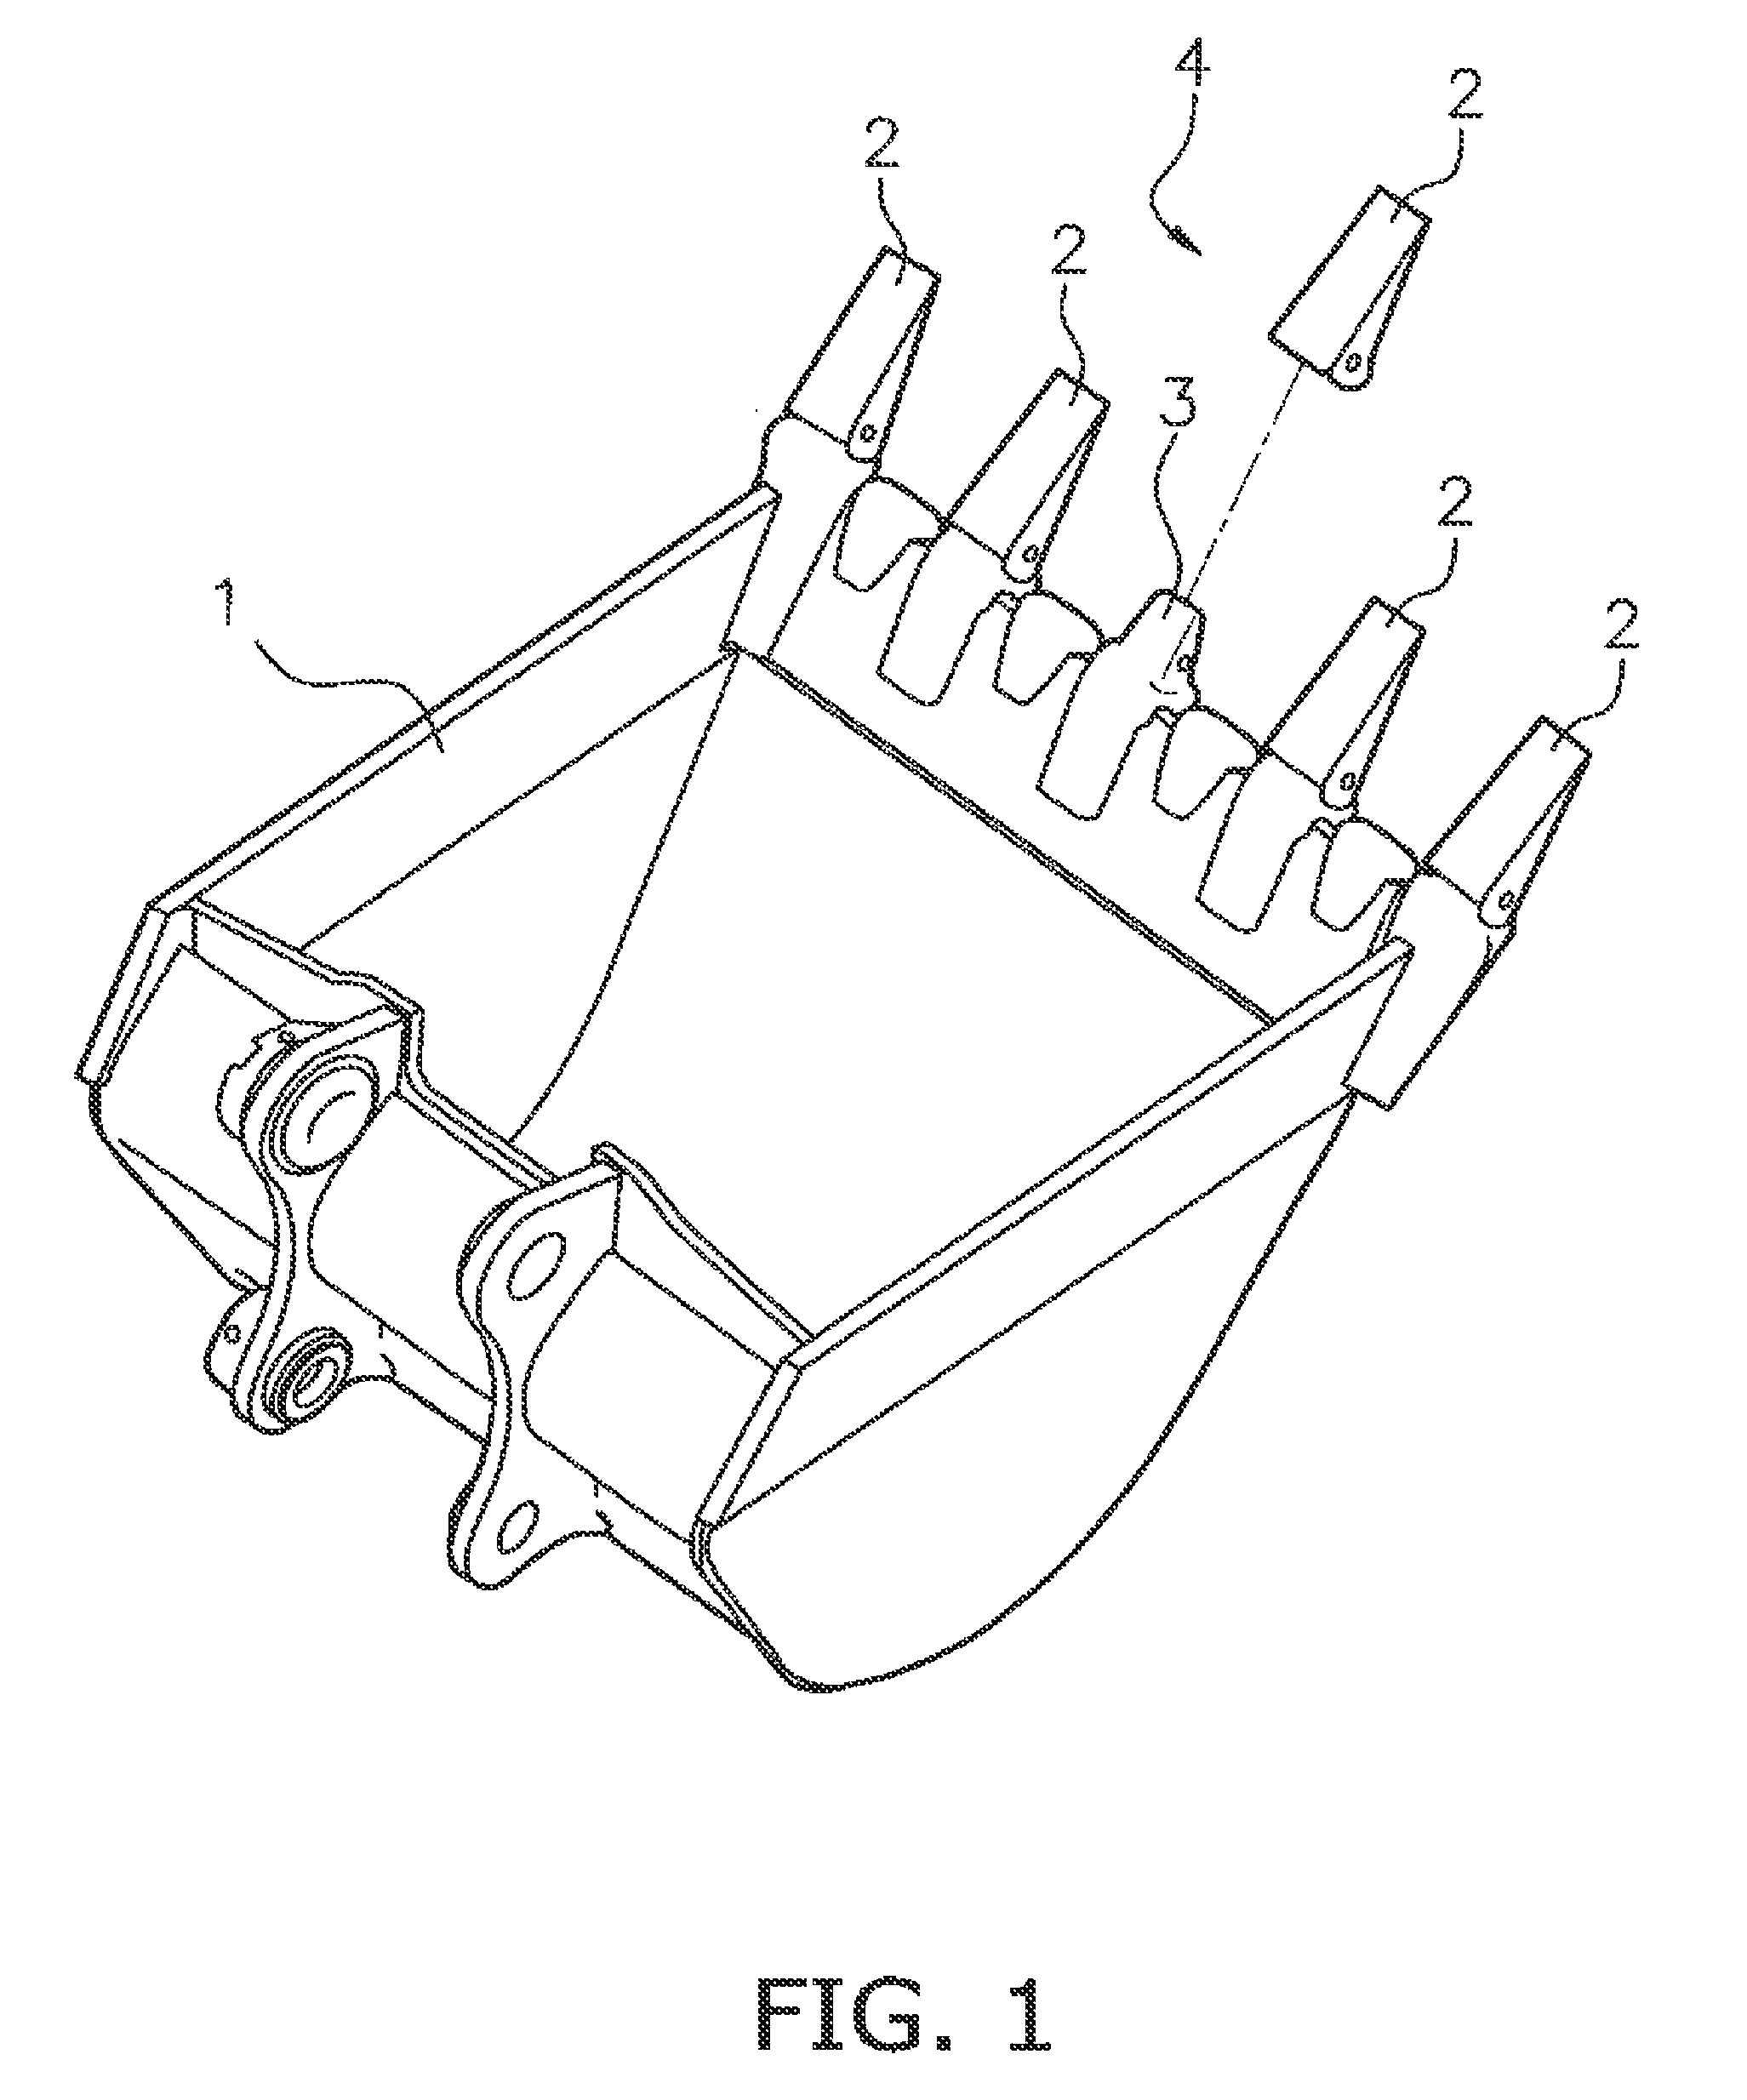 Bucket tooth for construction vehicle